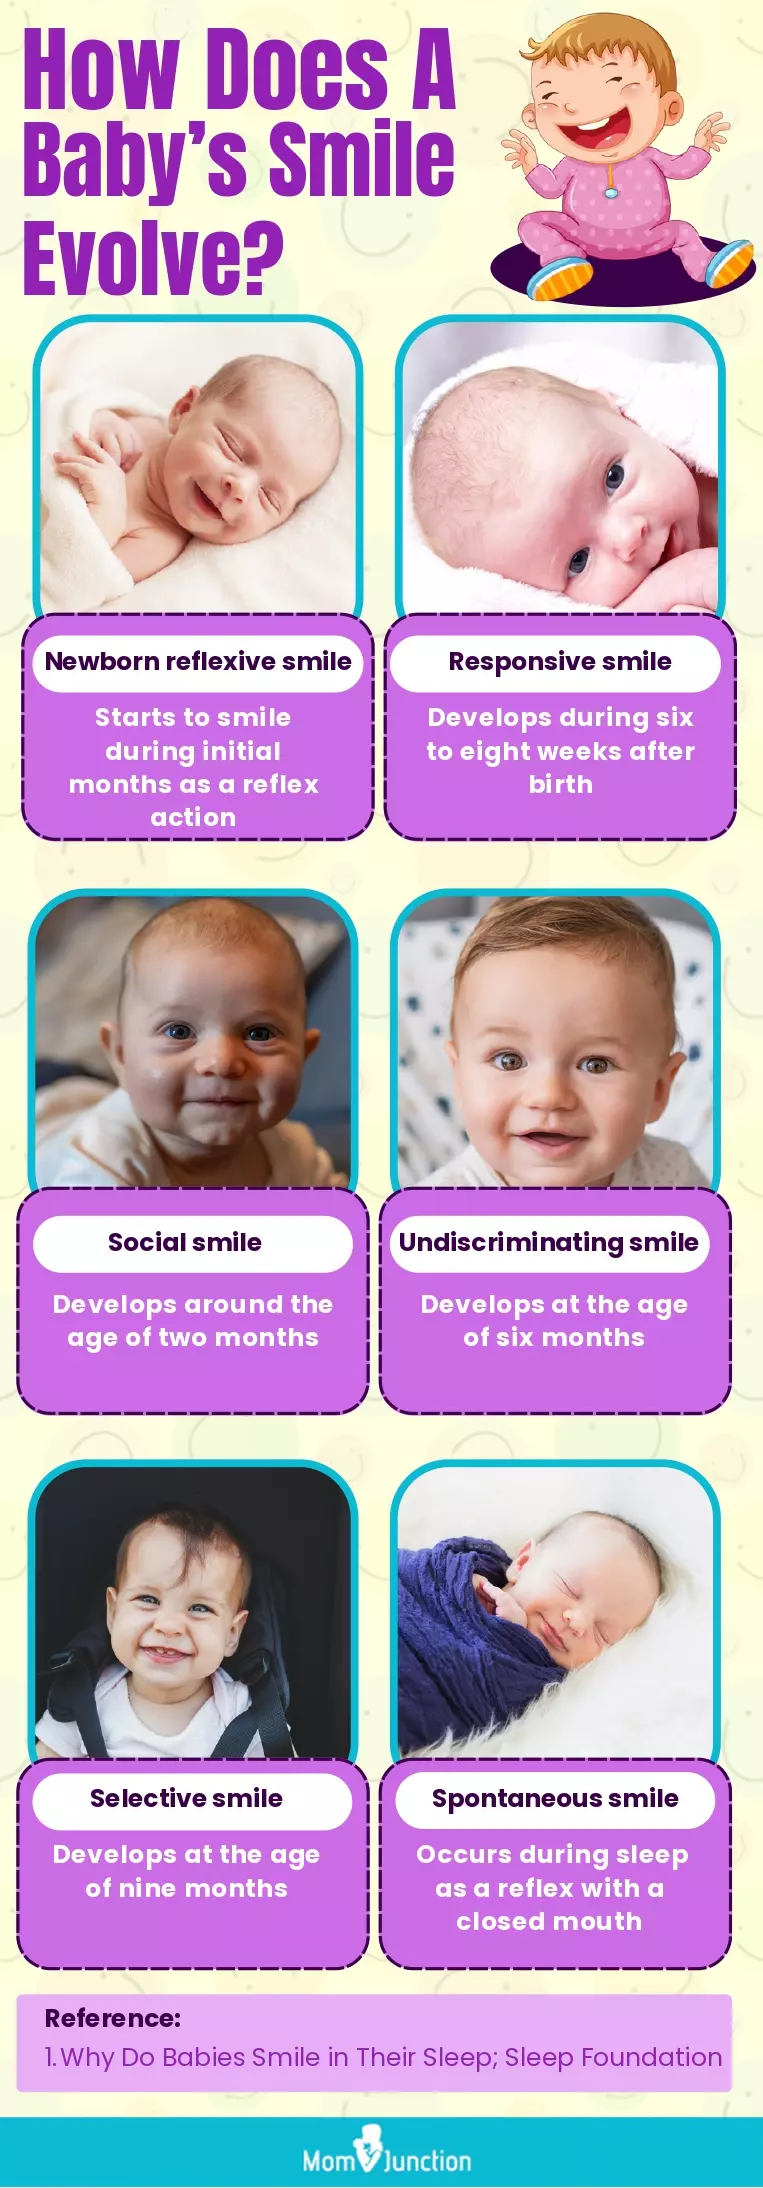 how do babies smile evolve (infographic)